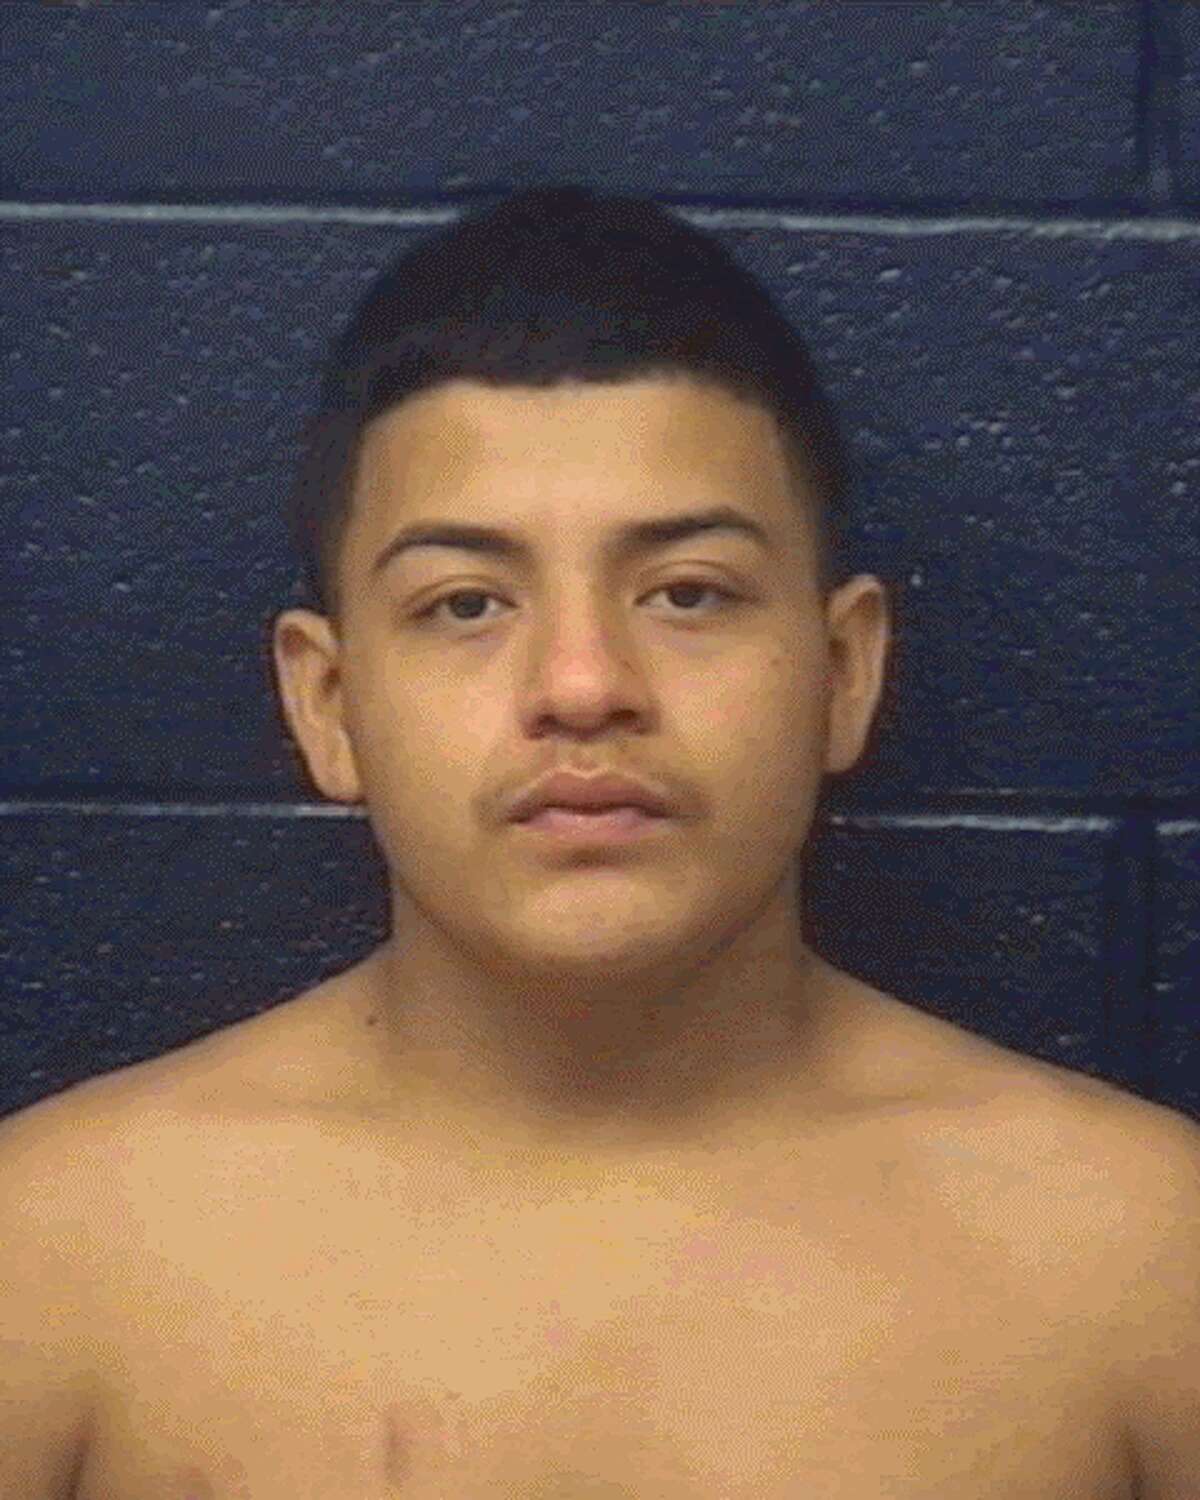 GUZMAN, LUIS (W M) (17) years of age was arrested on the charge of THEFT OF MOTOR VEHICLE TRUCKS AND BUSES (F), at 409 RIVERHILL LOOP, at 0300 hours on 1/16/2017